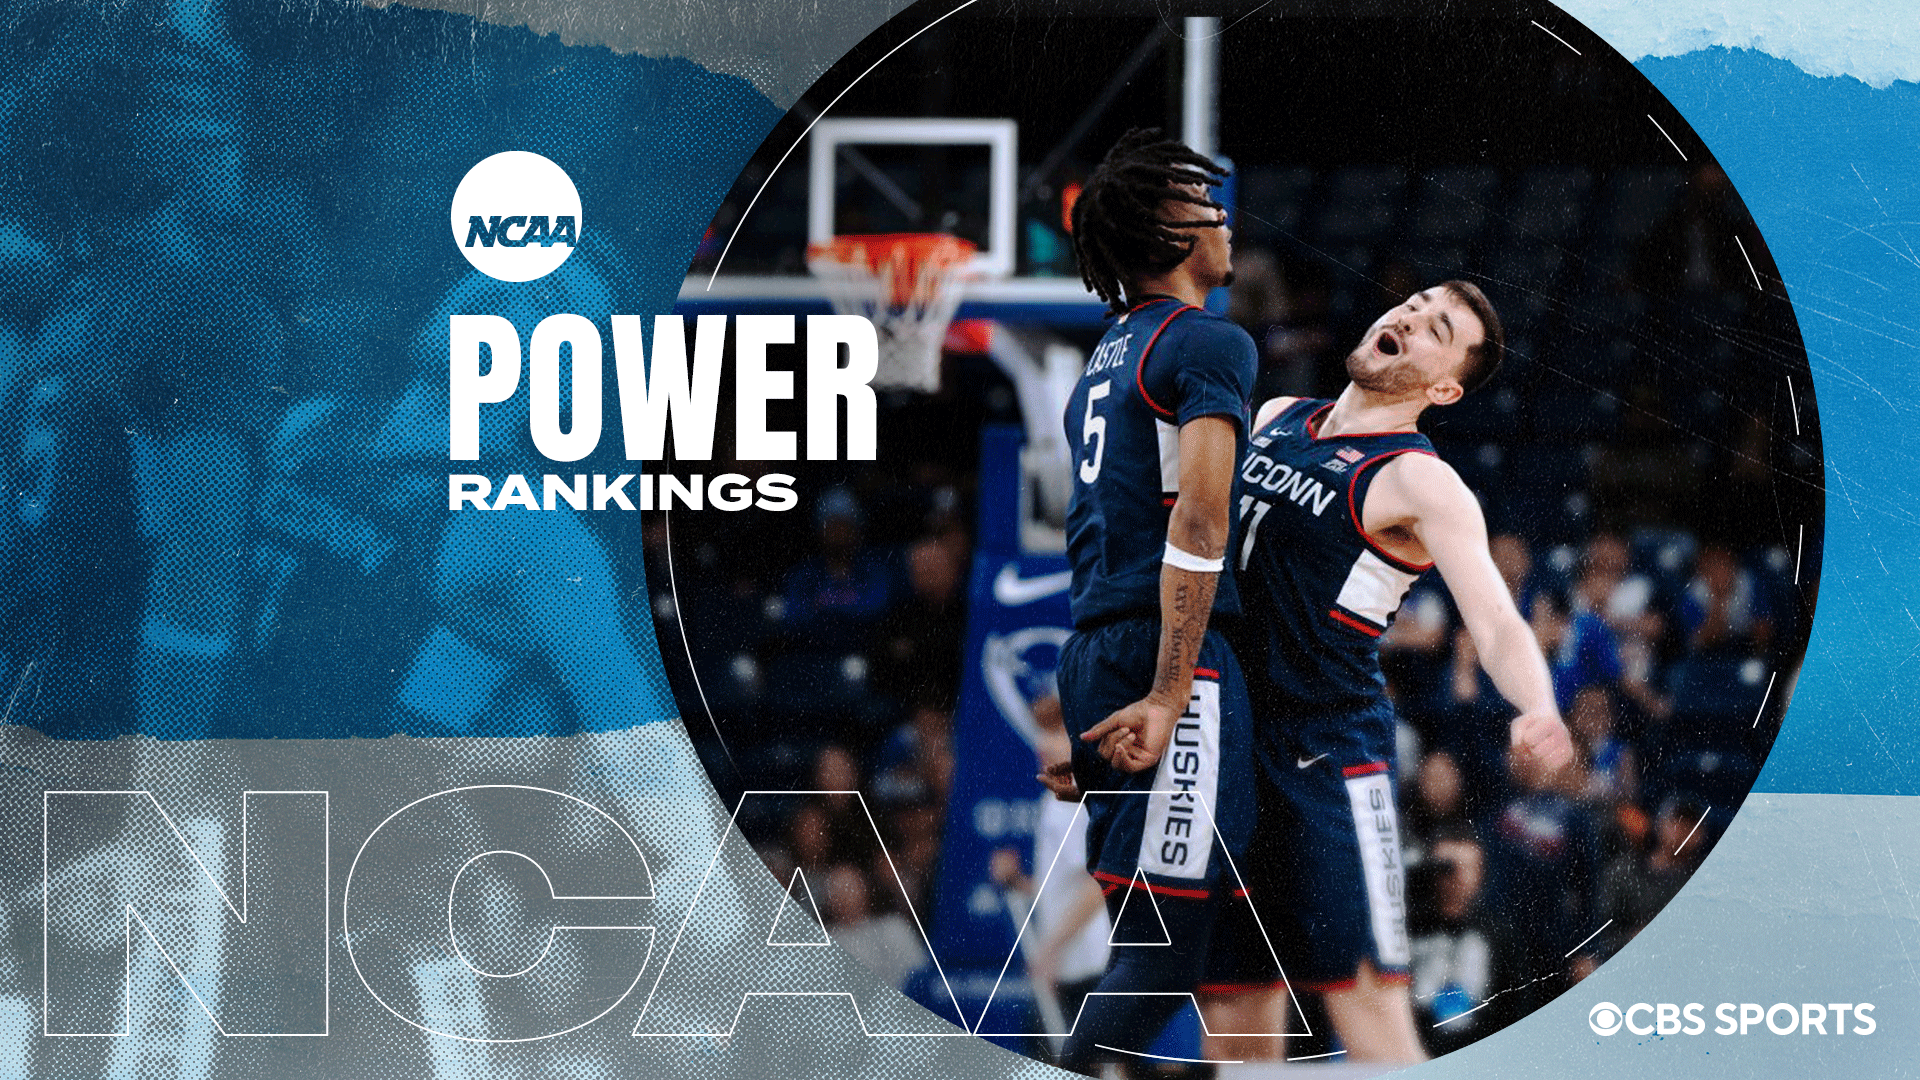 College basketball power rankings: UConn separating itself from pack with nation's longest winning streak